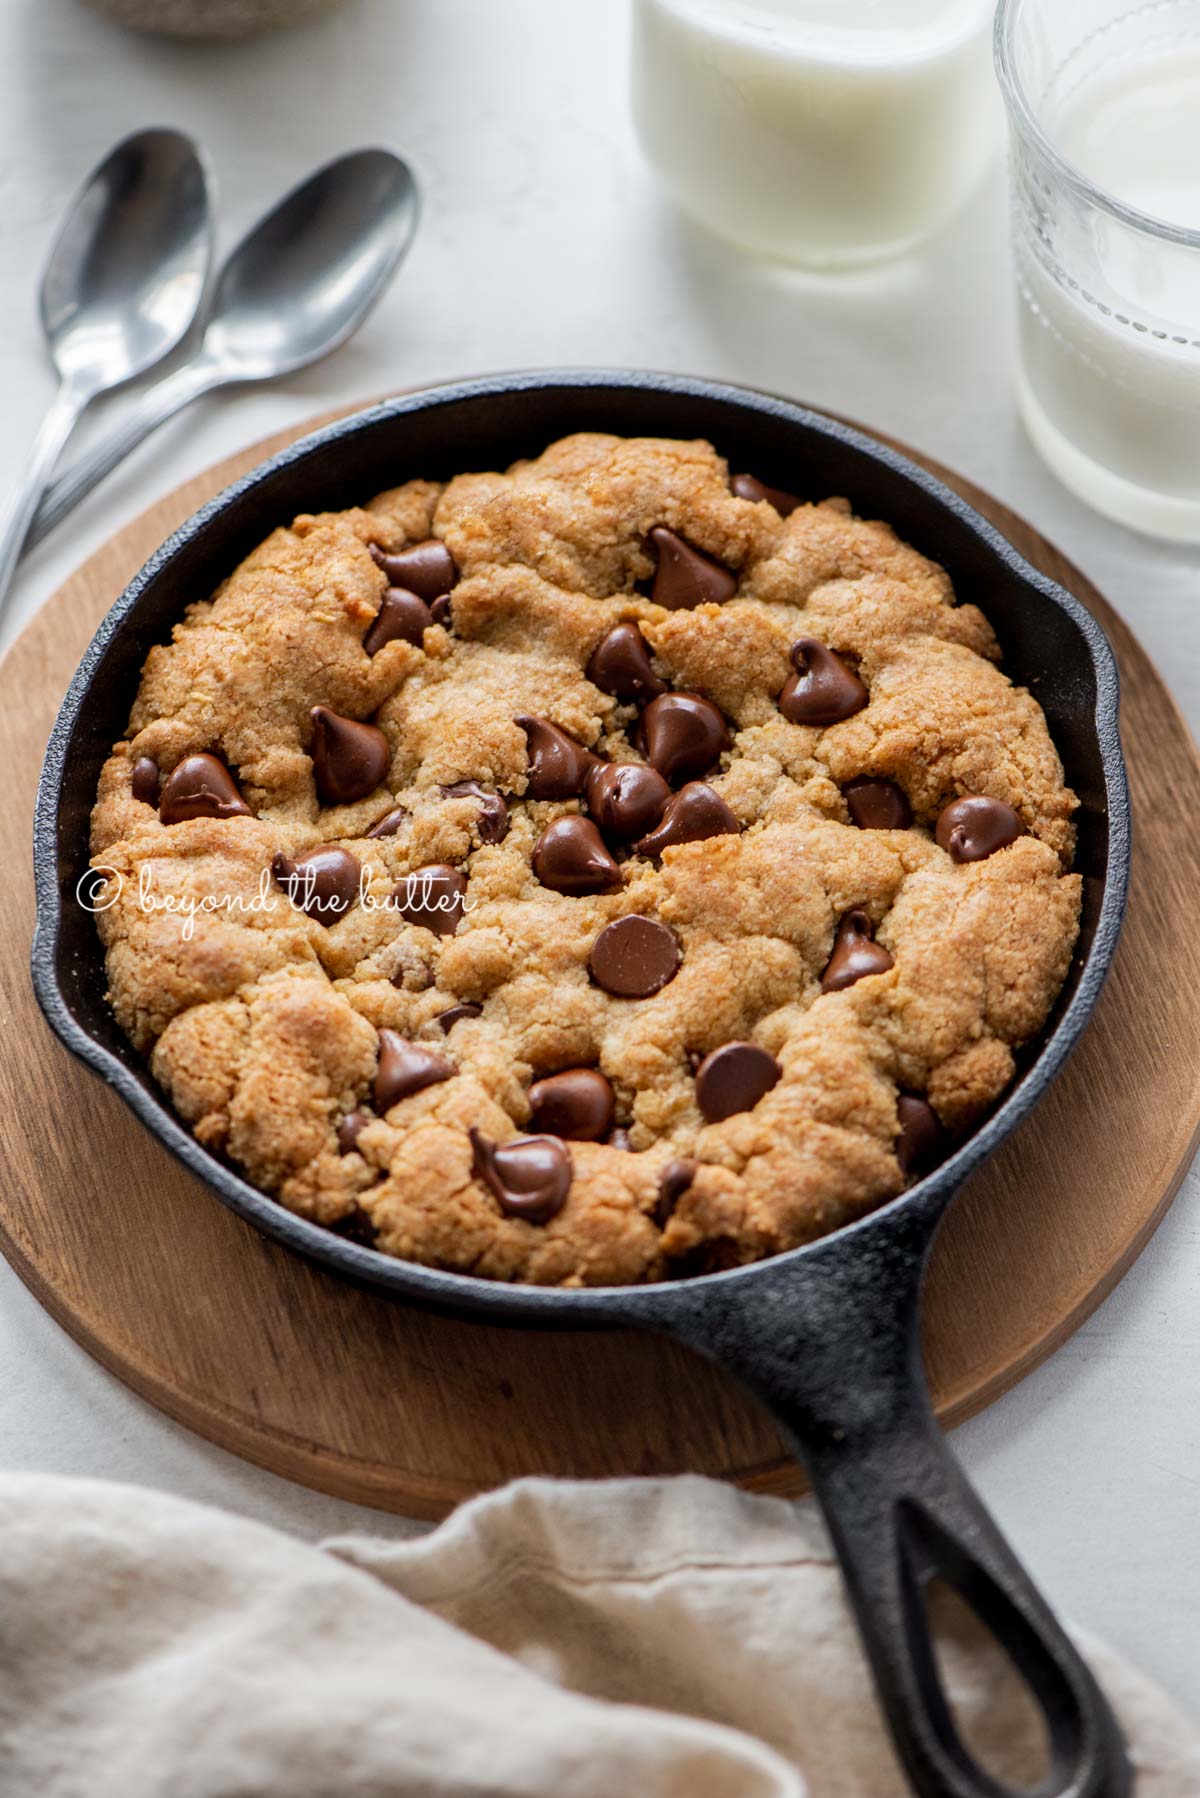 Just baked chocolate chip skillet cookies on light gray background with small bowl of chocolate chips, glasses of milk, and cloth napkin | All Images © Beyond the Butter®